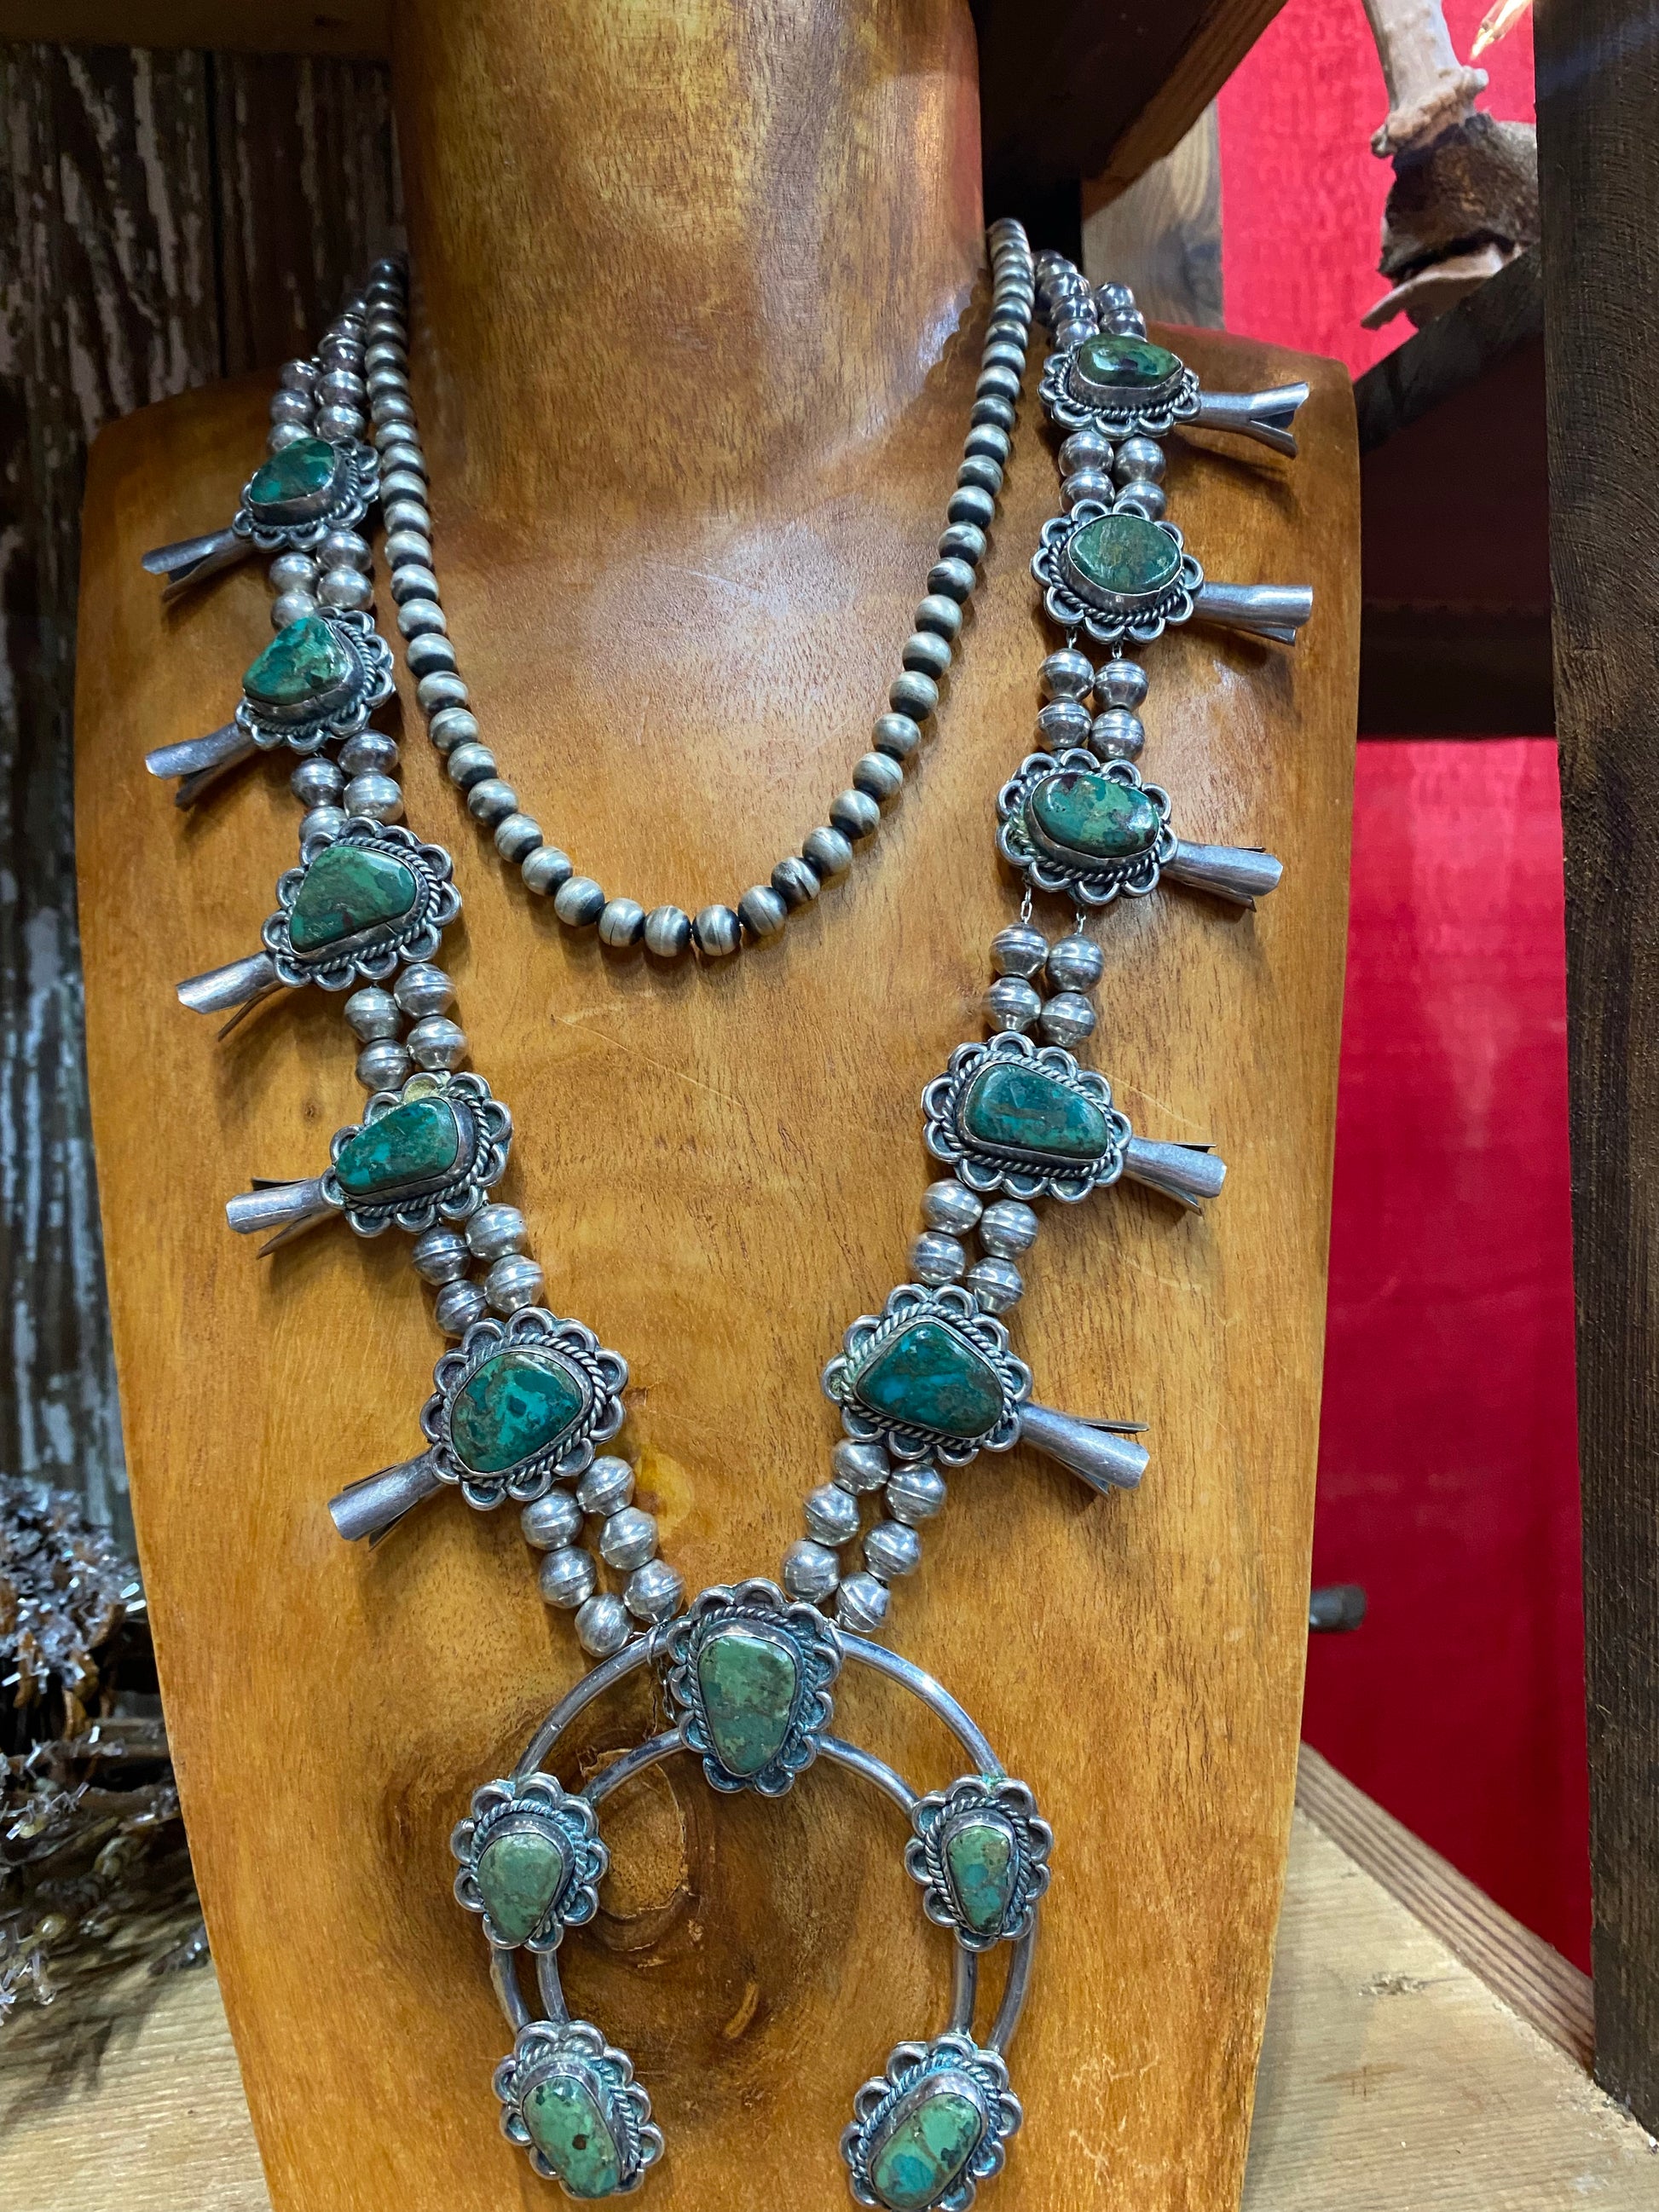 Kingman Turquoise Squash Blossom Necklace by Brenda Jimenez – Persimmon  Hill at the National Cowboy & Western Heritage Museum